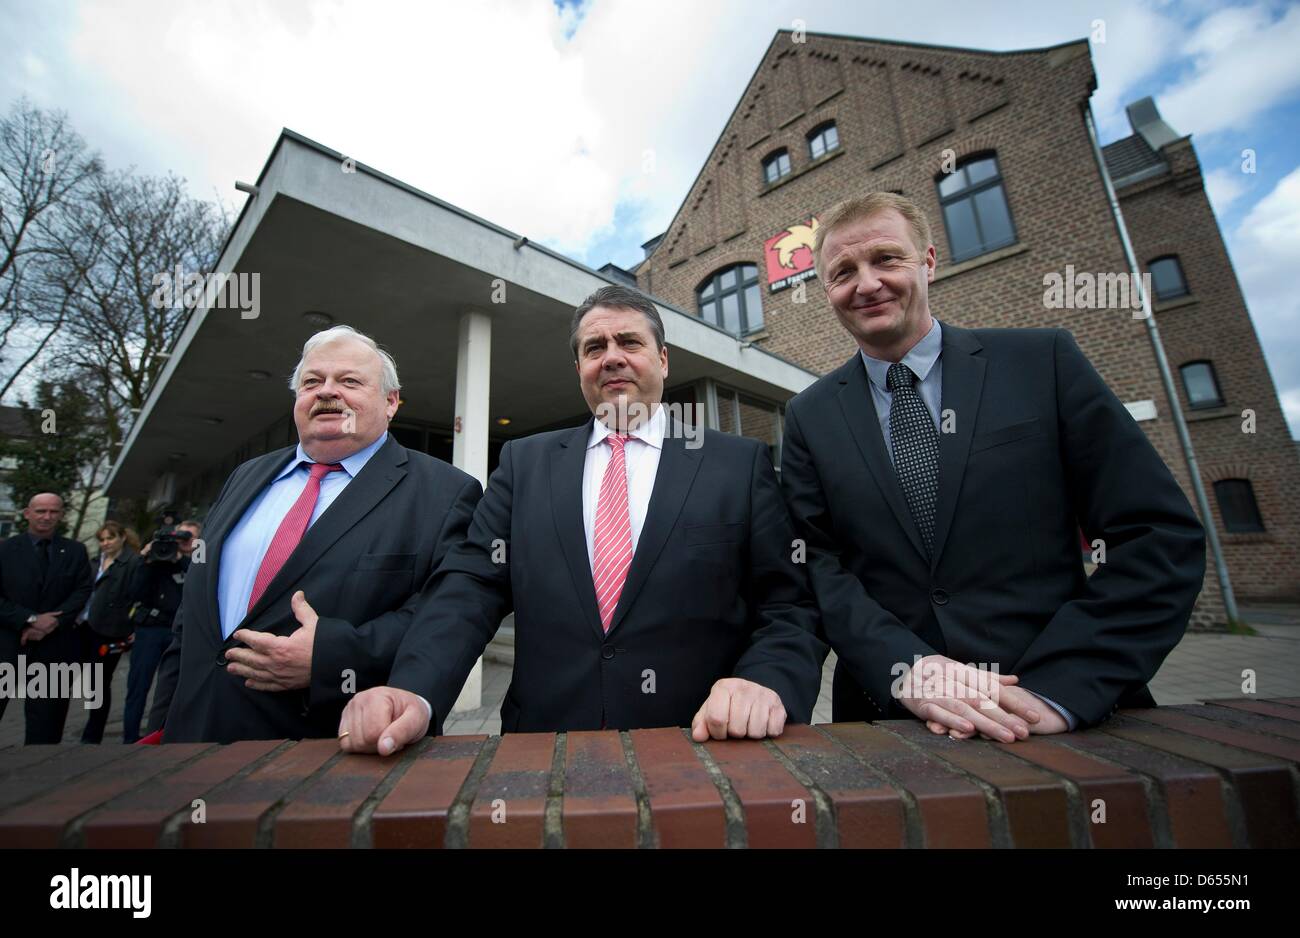 Guntram Schneider (L-R), Minister of Social Affairs of North Rhine-Westphalia, Ralf Jaeger, North Rhine-Westphalia's Minister of Interior, and chairman of the SPD, Sigmar Gabriel, stand in front of the Alte Feuerwache in Duisburg, Germany, 12 April 2013. SPD-politicians Ralf Jaeger, Guntram Schneider and Sigmar Gabriel discussed the increase of immigrantion caused by poverty from countries in the south-east of Europe with affected local comunities. Photo: DANIEL NAUPOLD Stock Photo